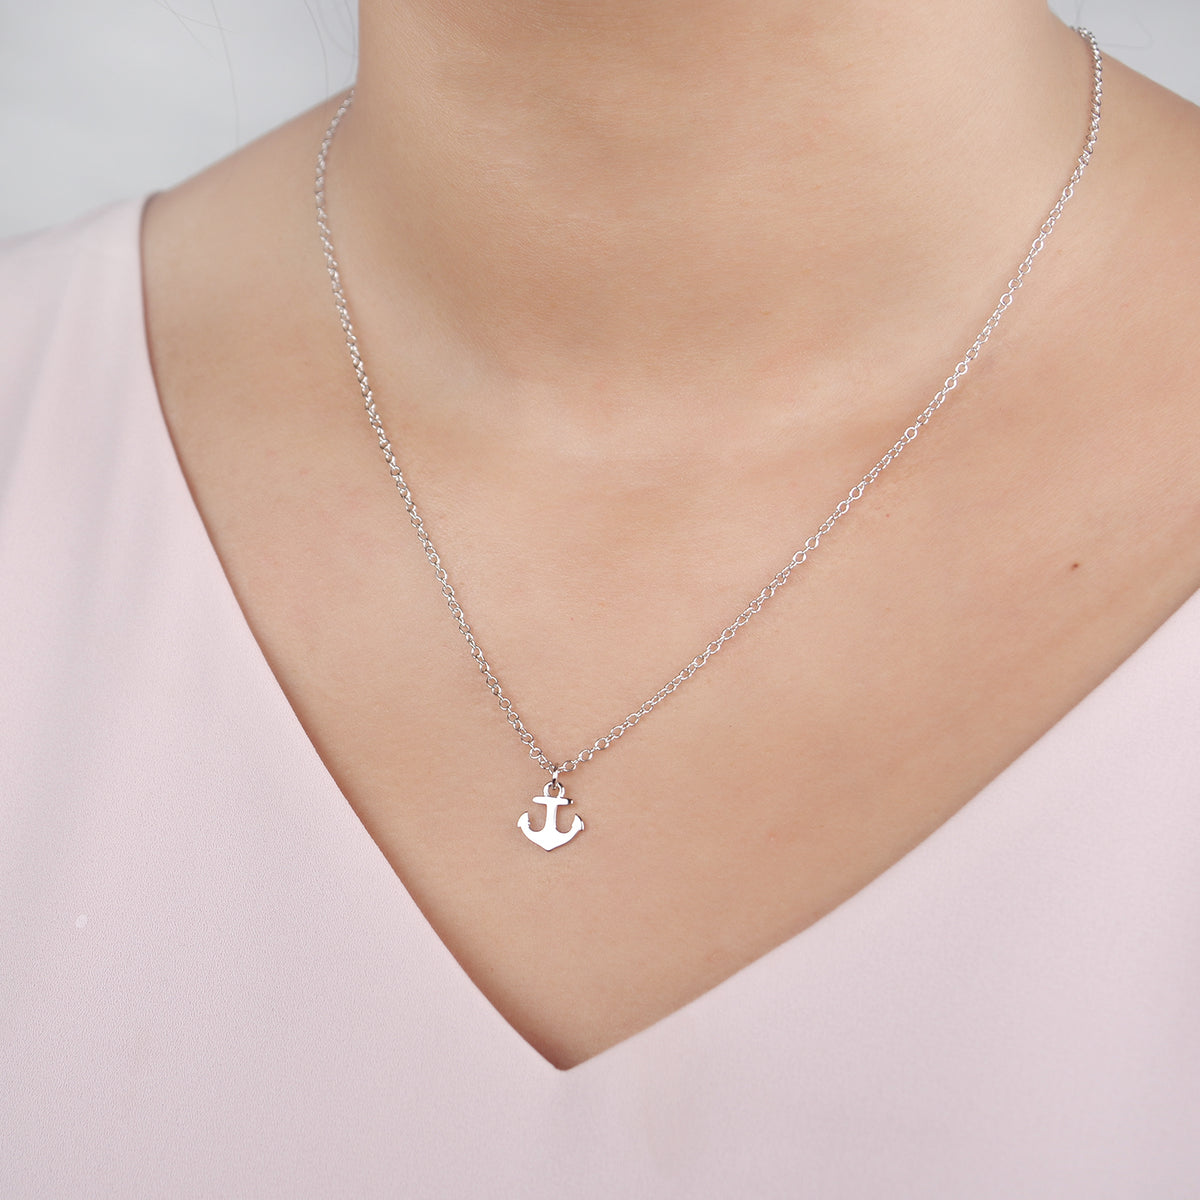 Recovery Anchor Pendant Necklace